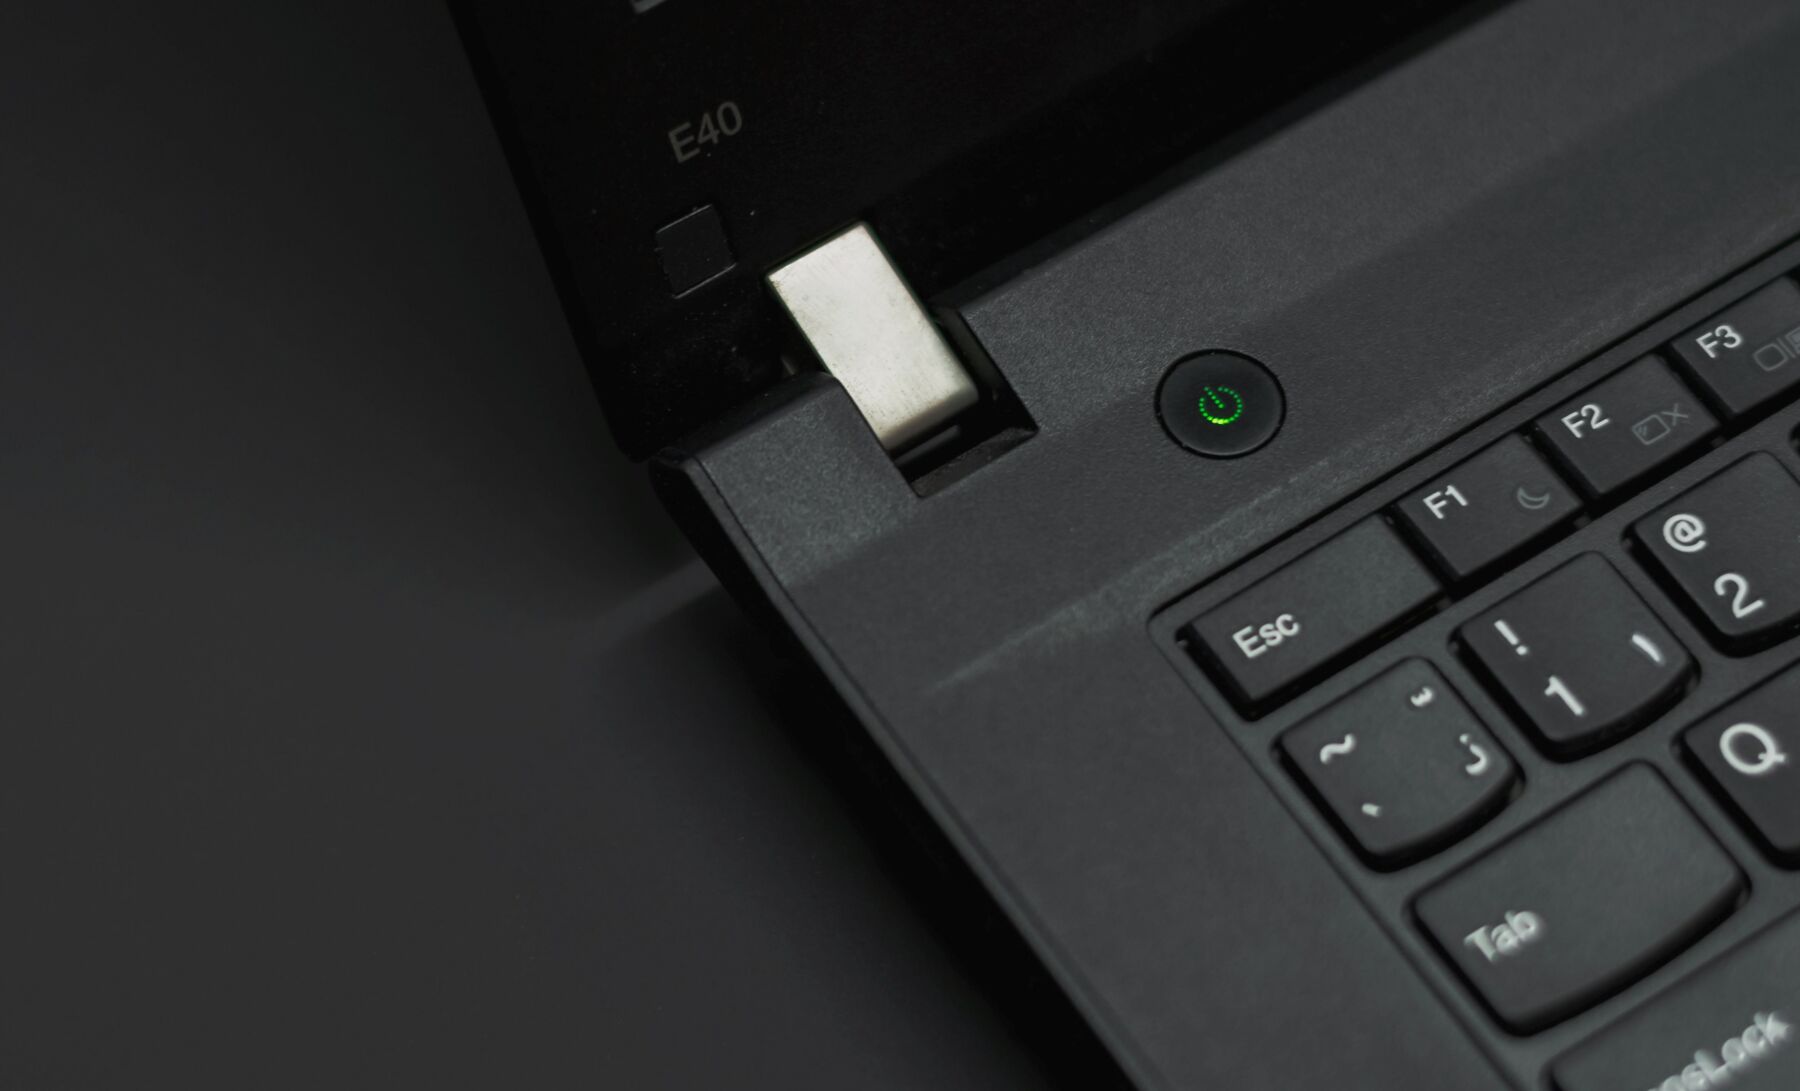 power standby button on laptop